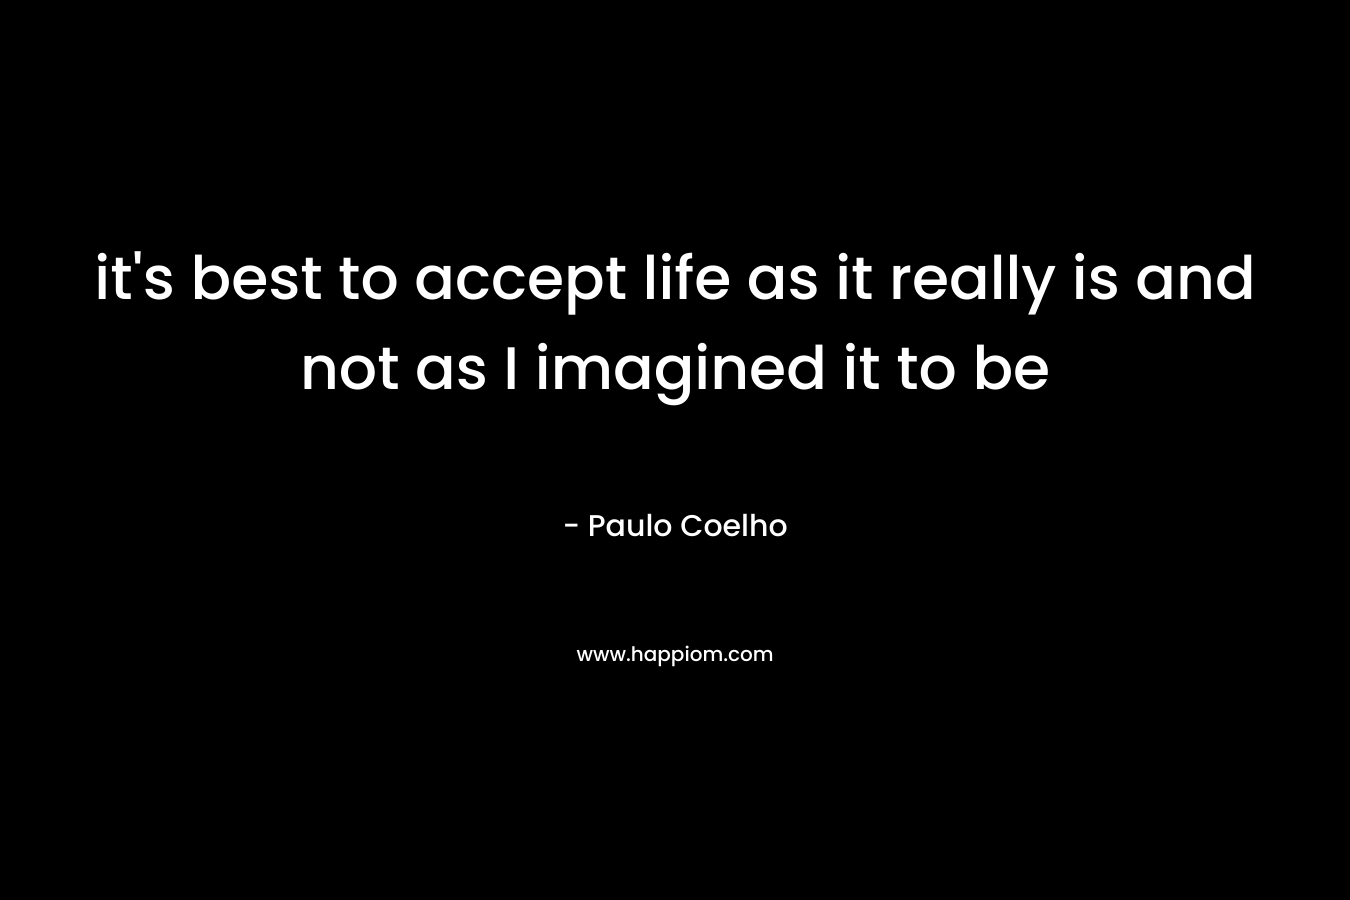 it's best to accept life as it really is and not as I imagined it to be